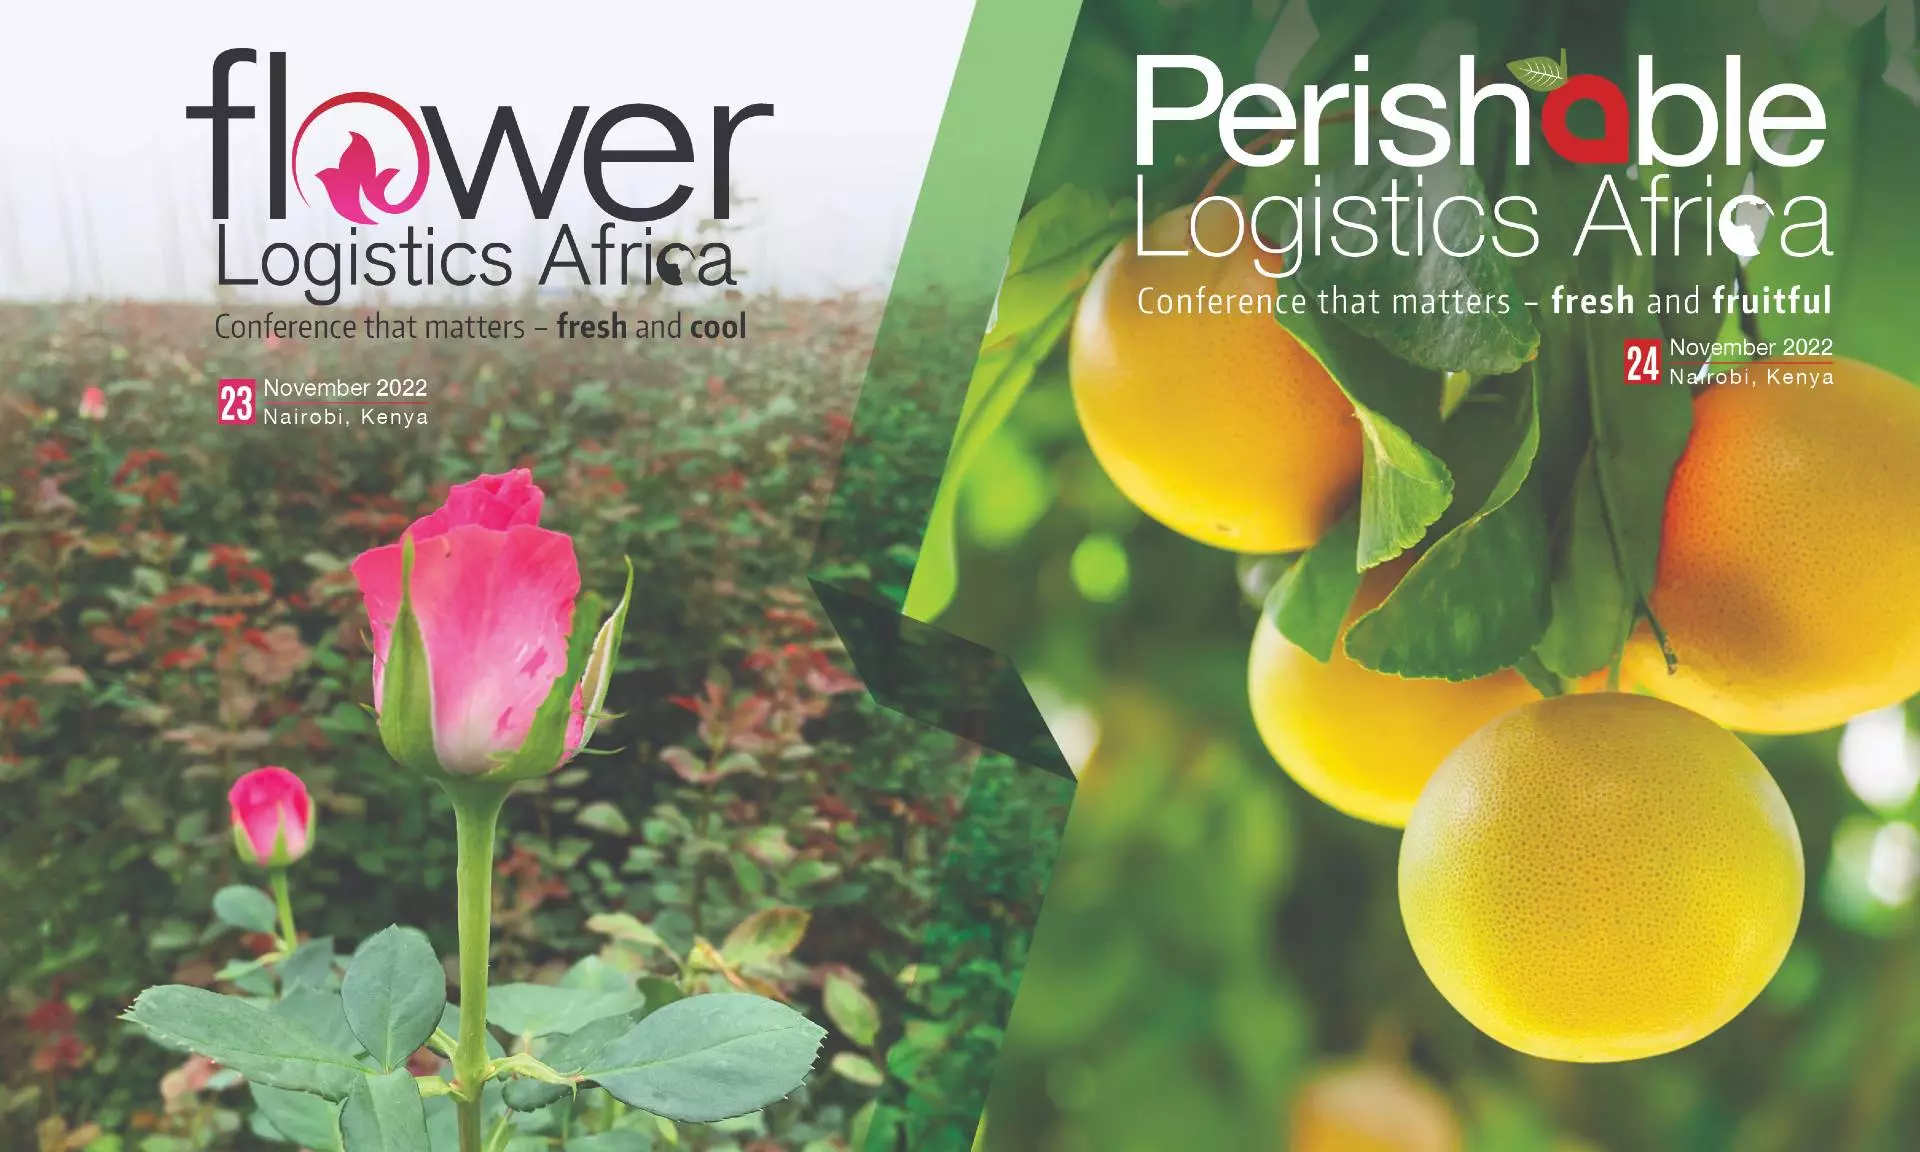 Brussels Airport presents Flower, Perishable Logistics Africa conferences in Nairobi